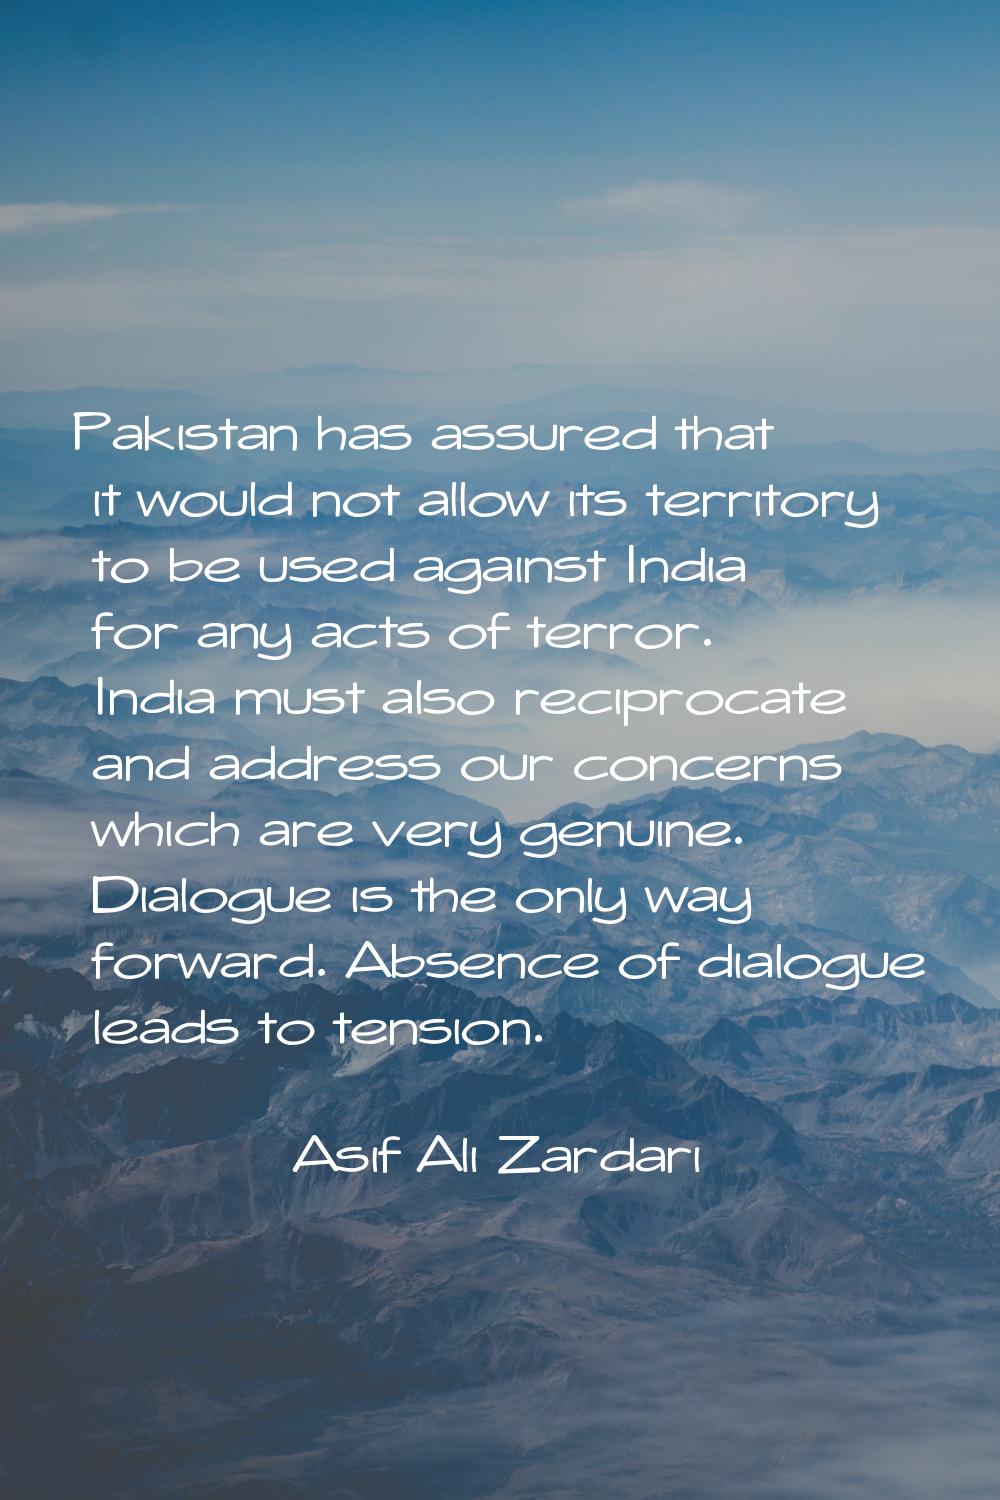 Pakistan has assured that it would not allow its territory to be used against India for any acts of